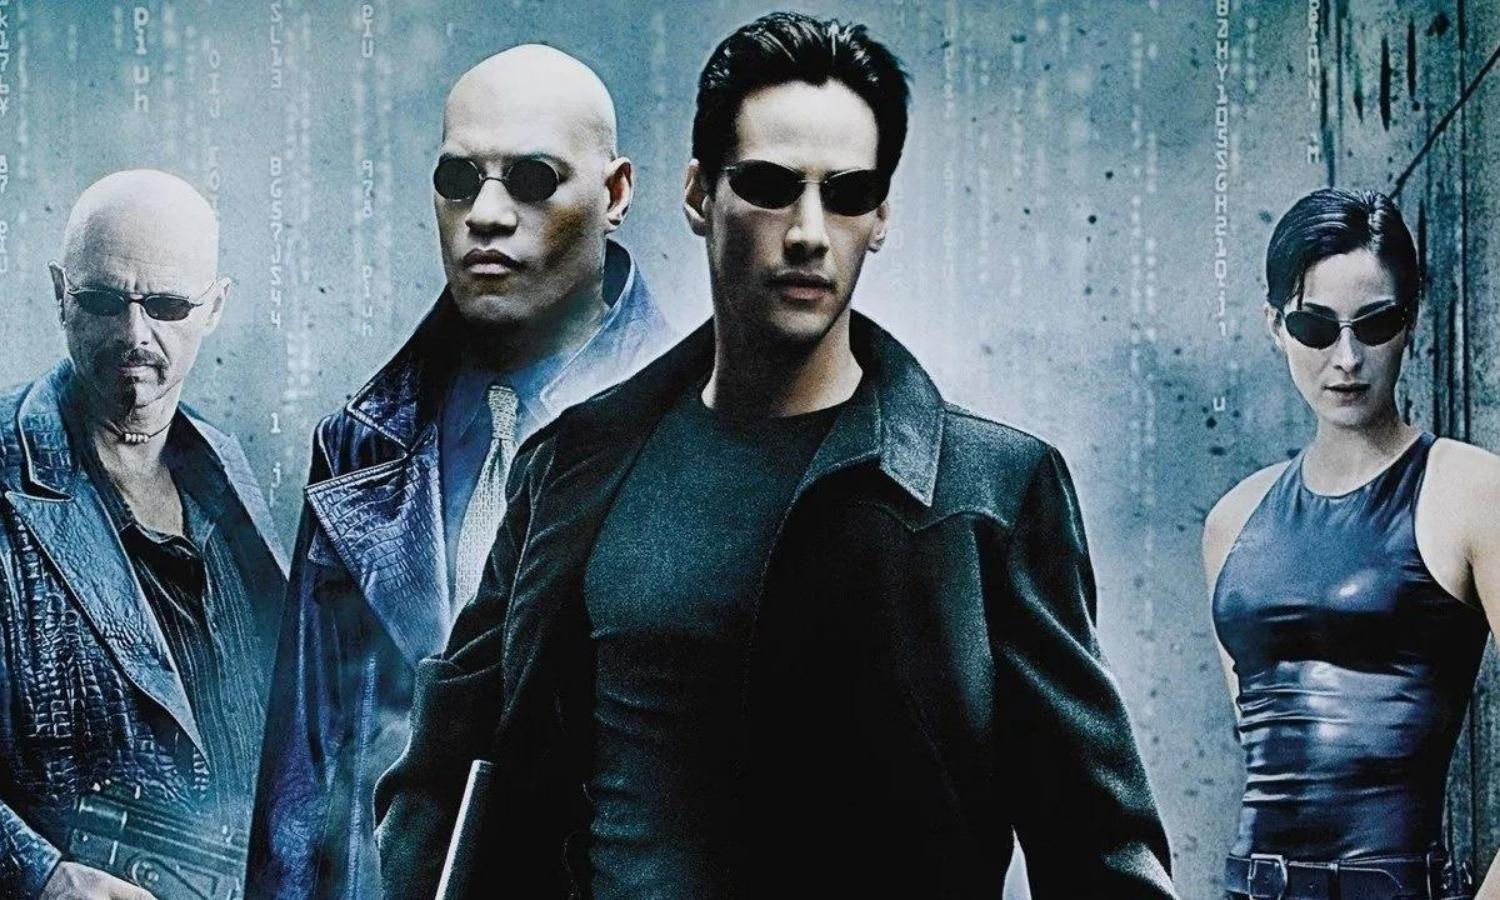 OTD in 1999: The Matrix was released in the US and grossed over $460 million worldwide.